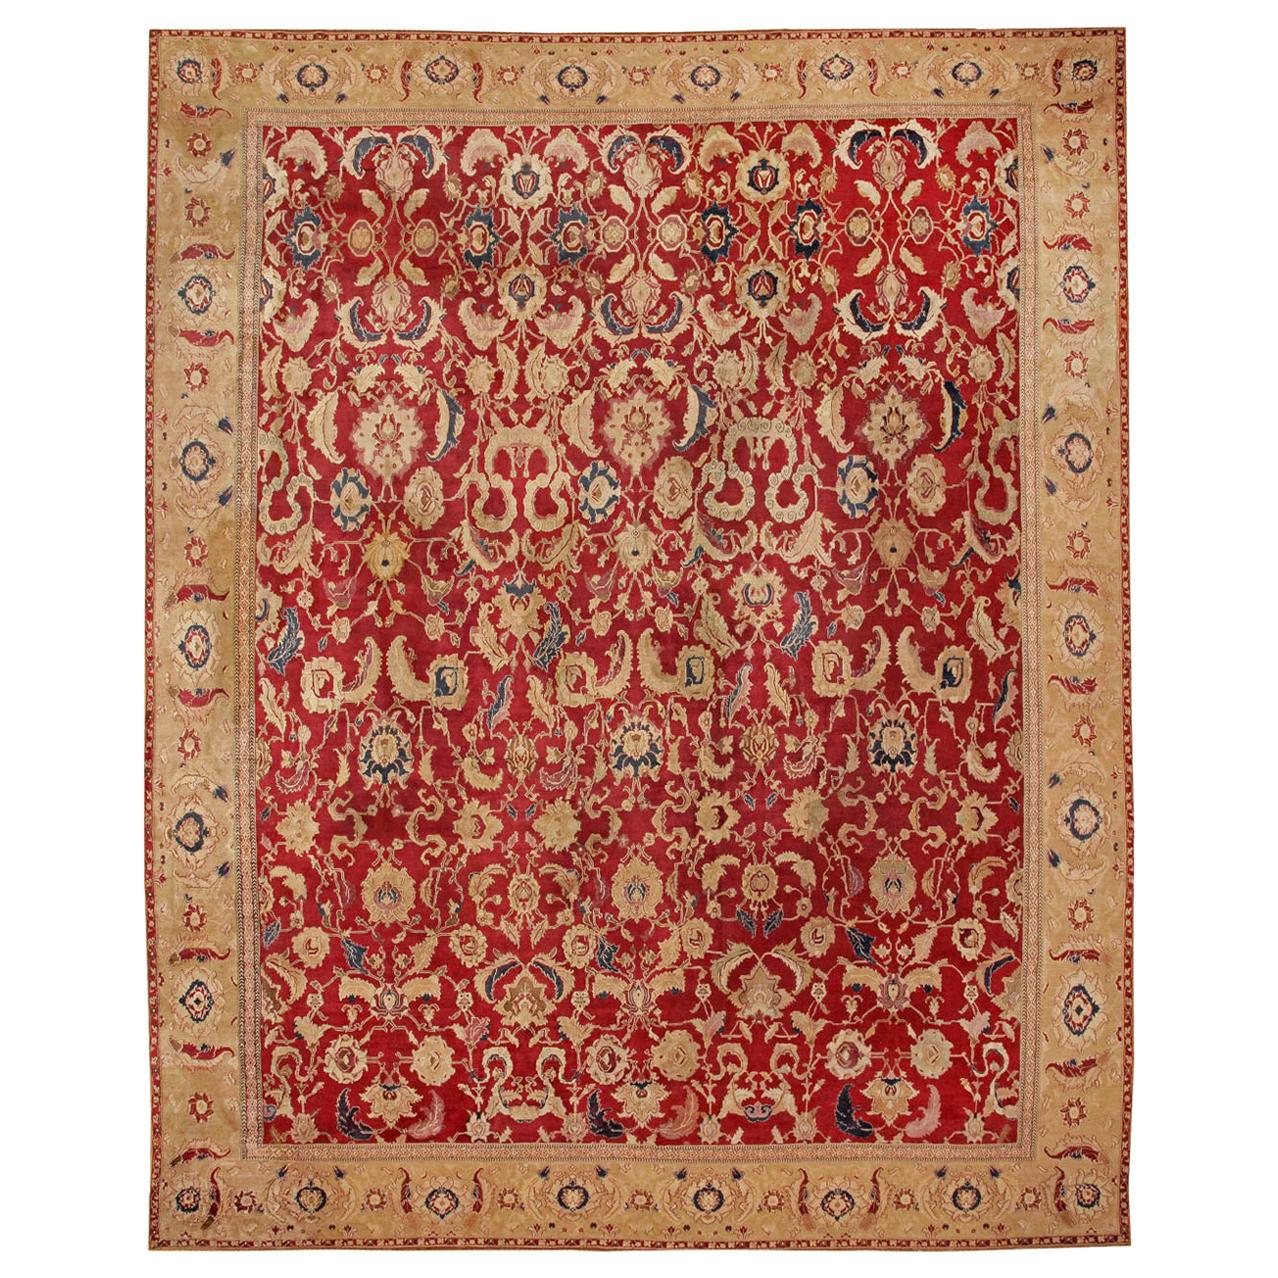 Antique Indian Agra Carpet. Size: 16 ft 7 in x 20 ft 10 in